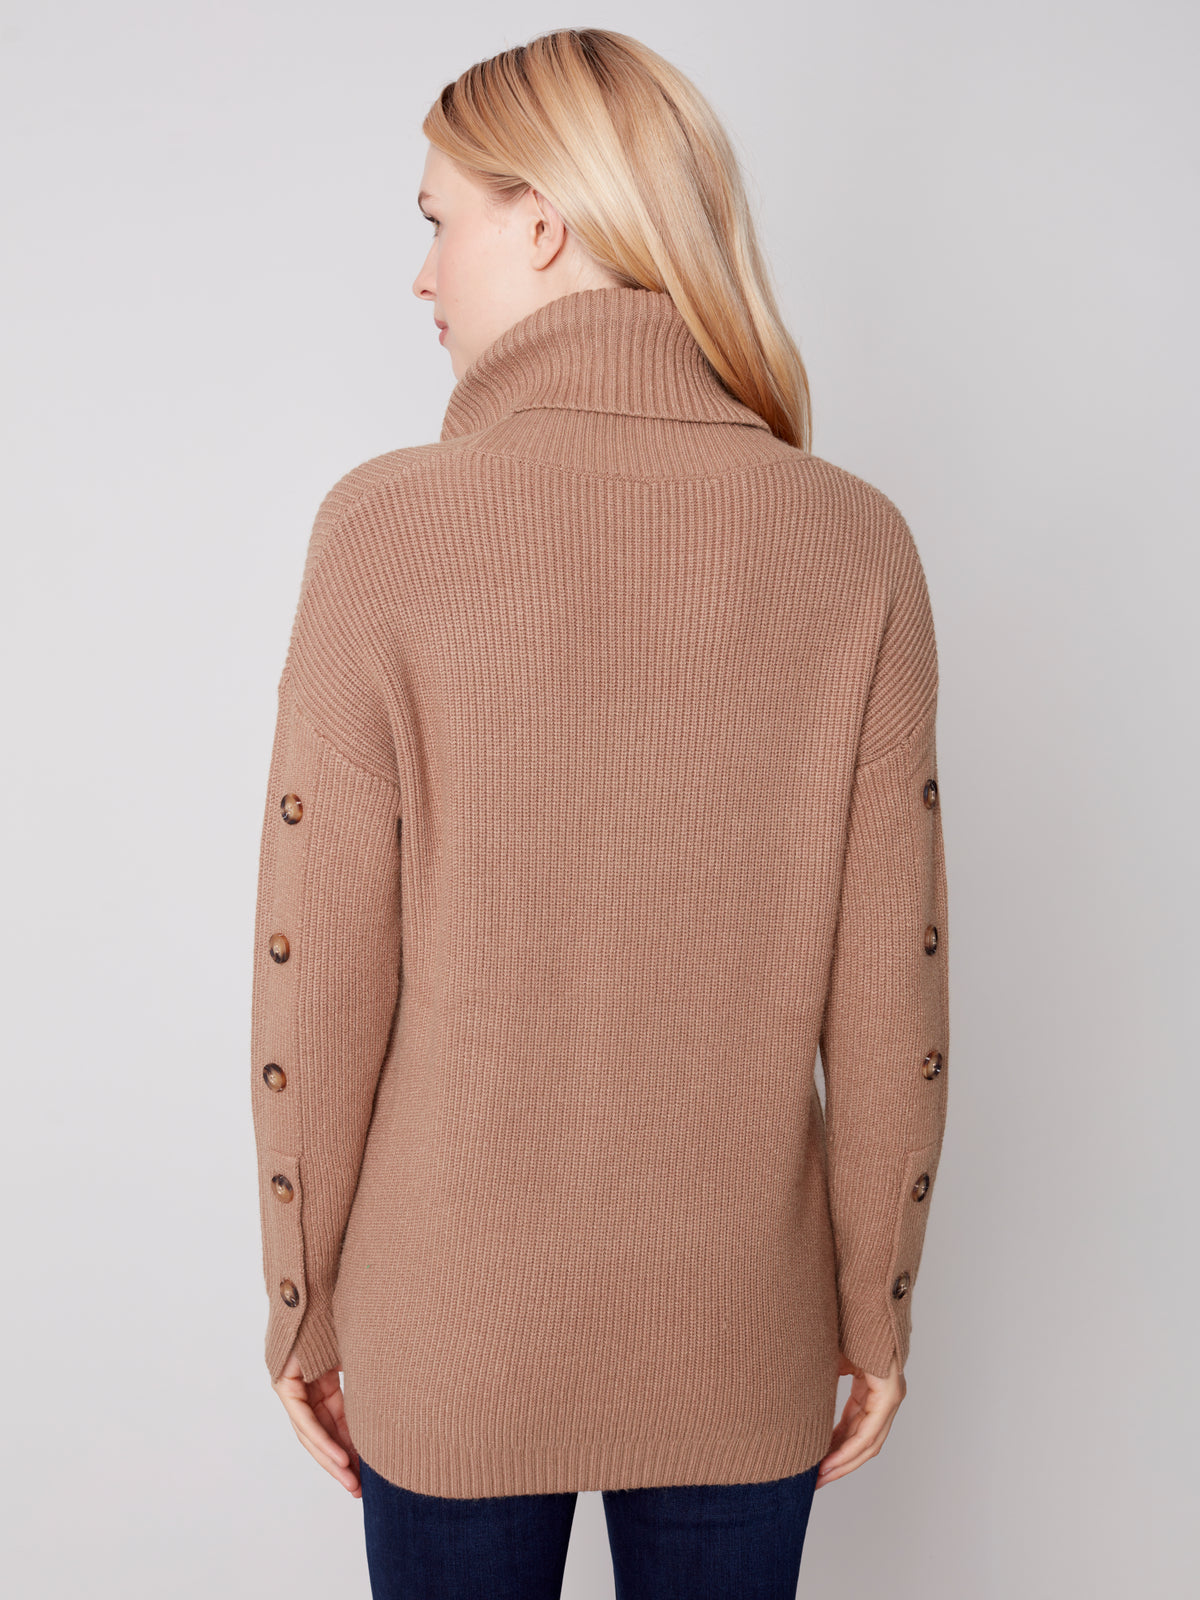 The Ivy Sweater in Truffle